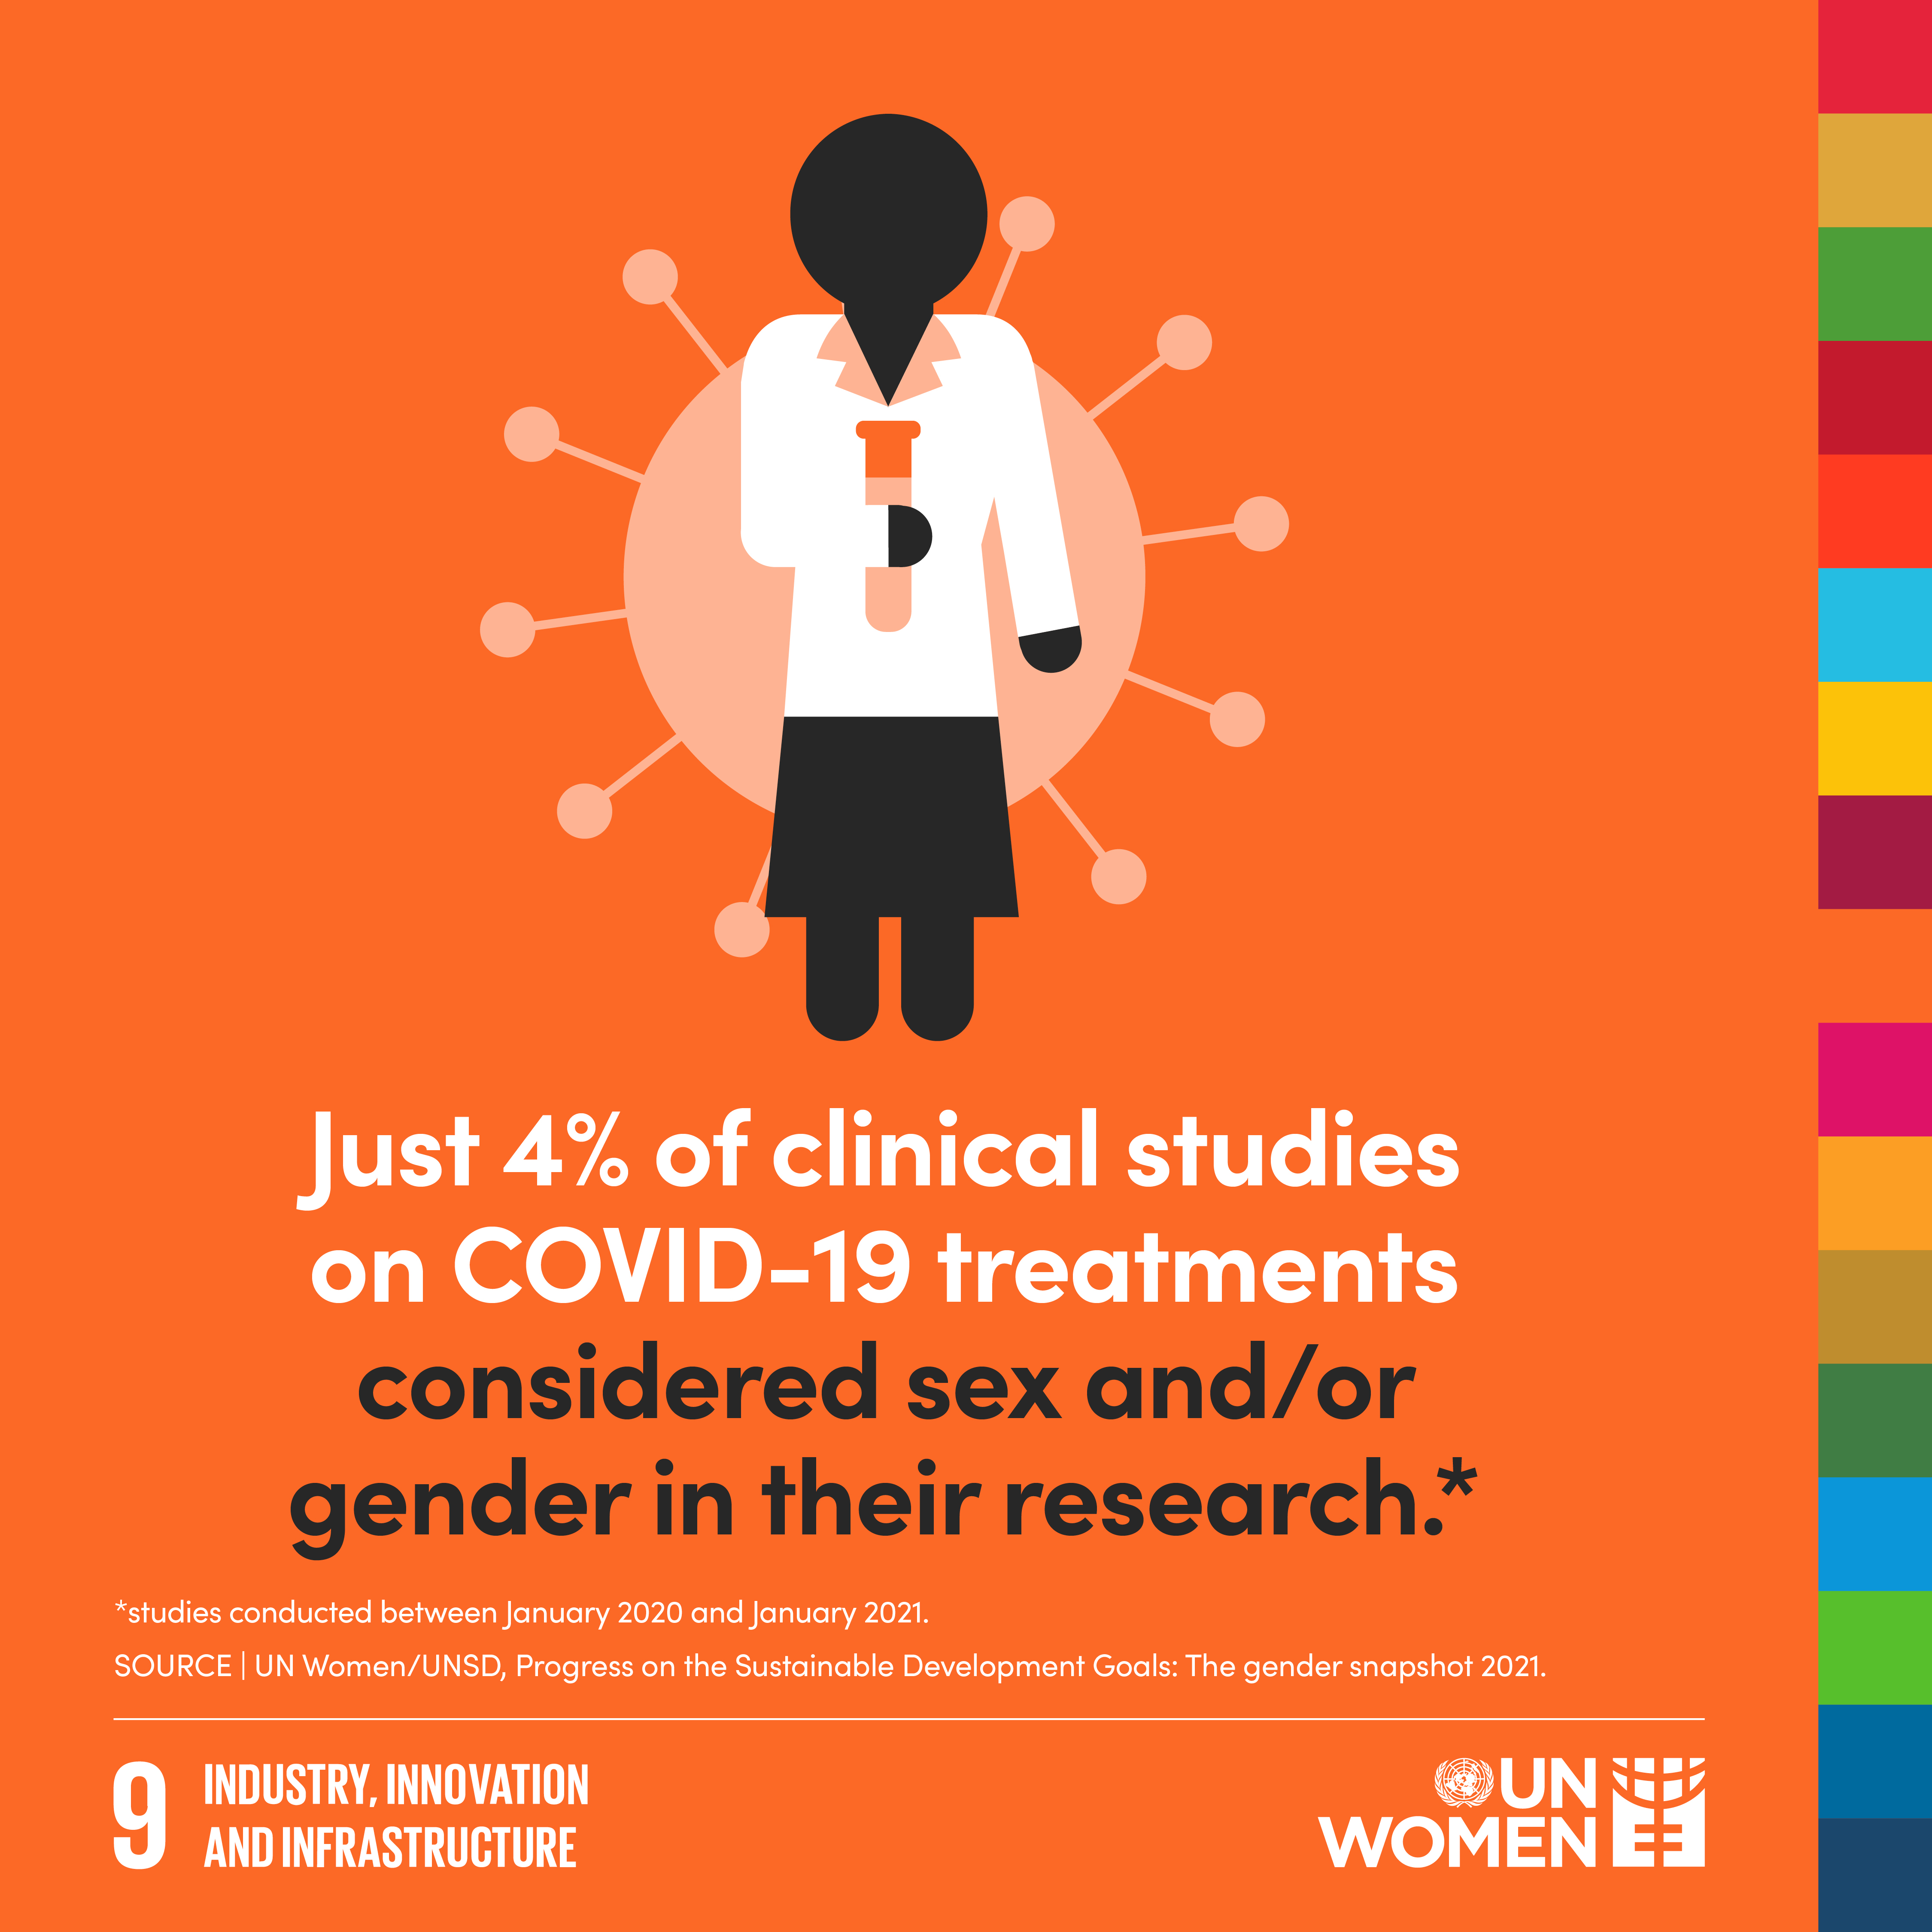 Just 4% of clinical studies on COVID-19 treatments considered sex and/or gender in their research